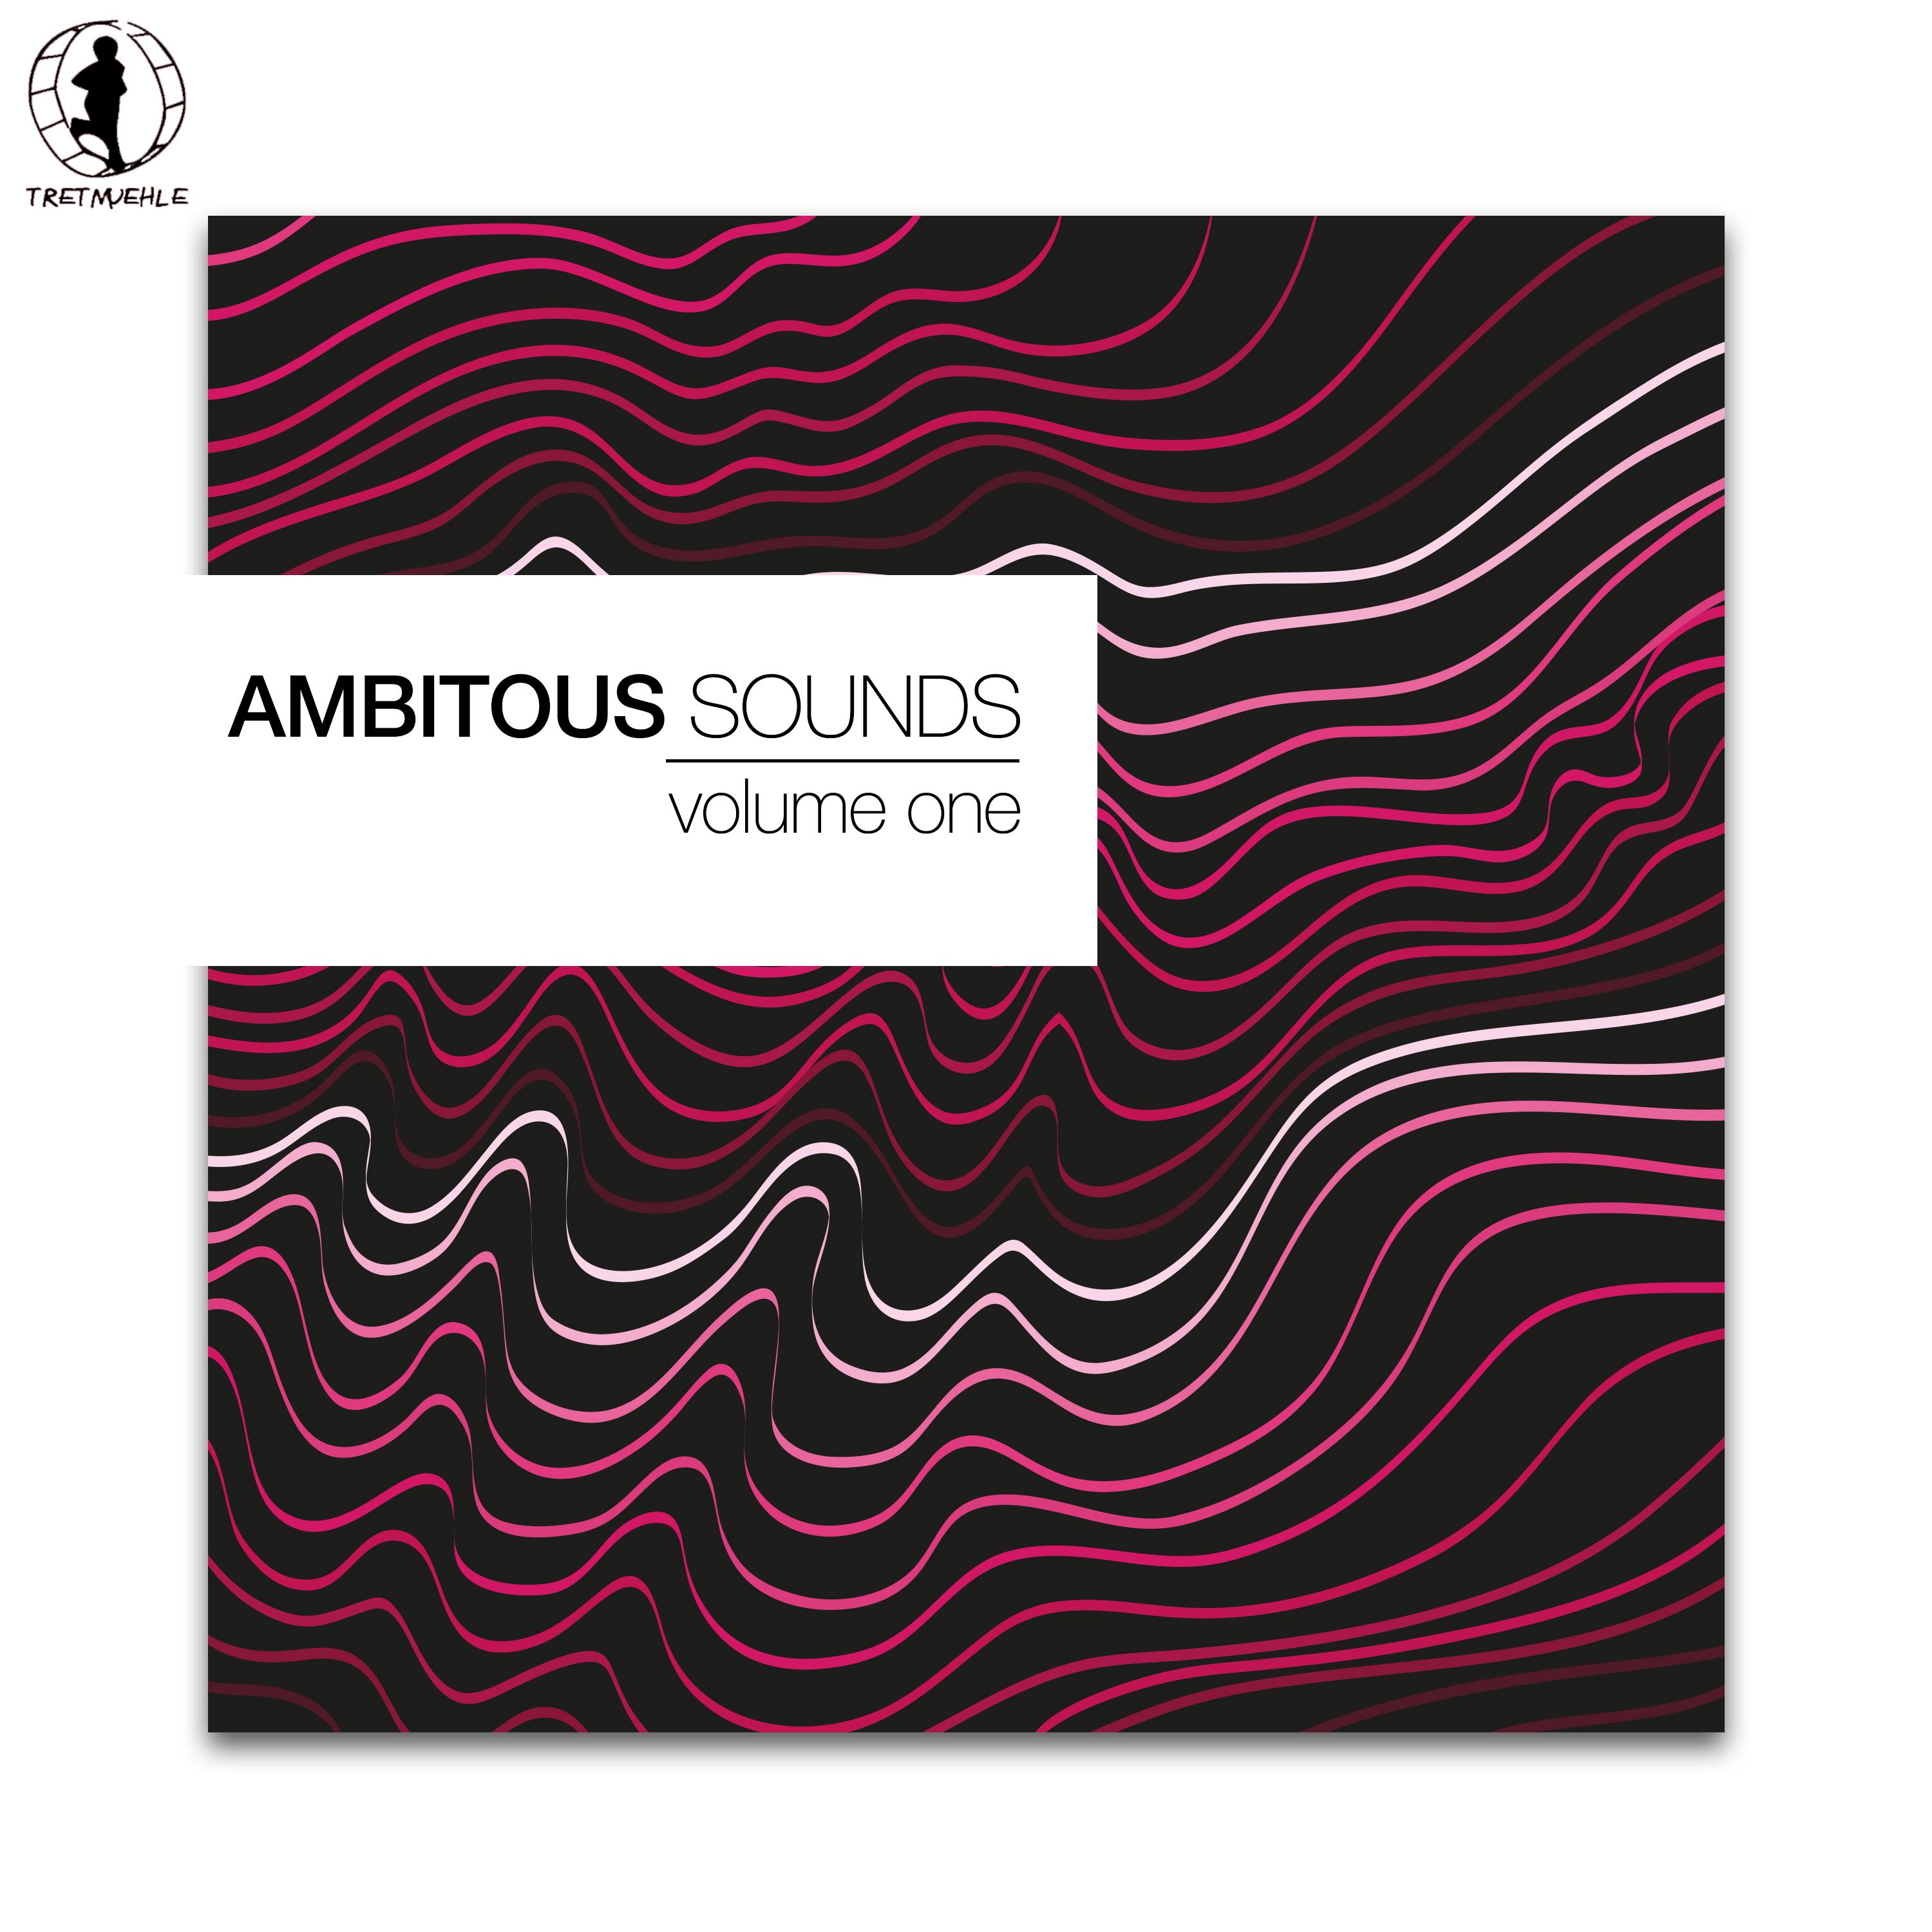 Ambitious Sounds, Vol. 1 - The Deep Side of Tech-House